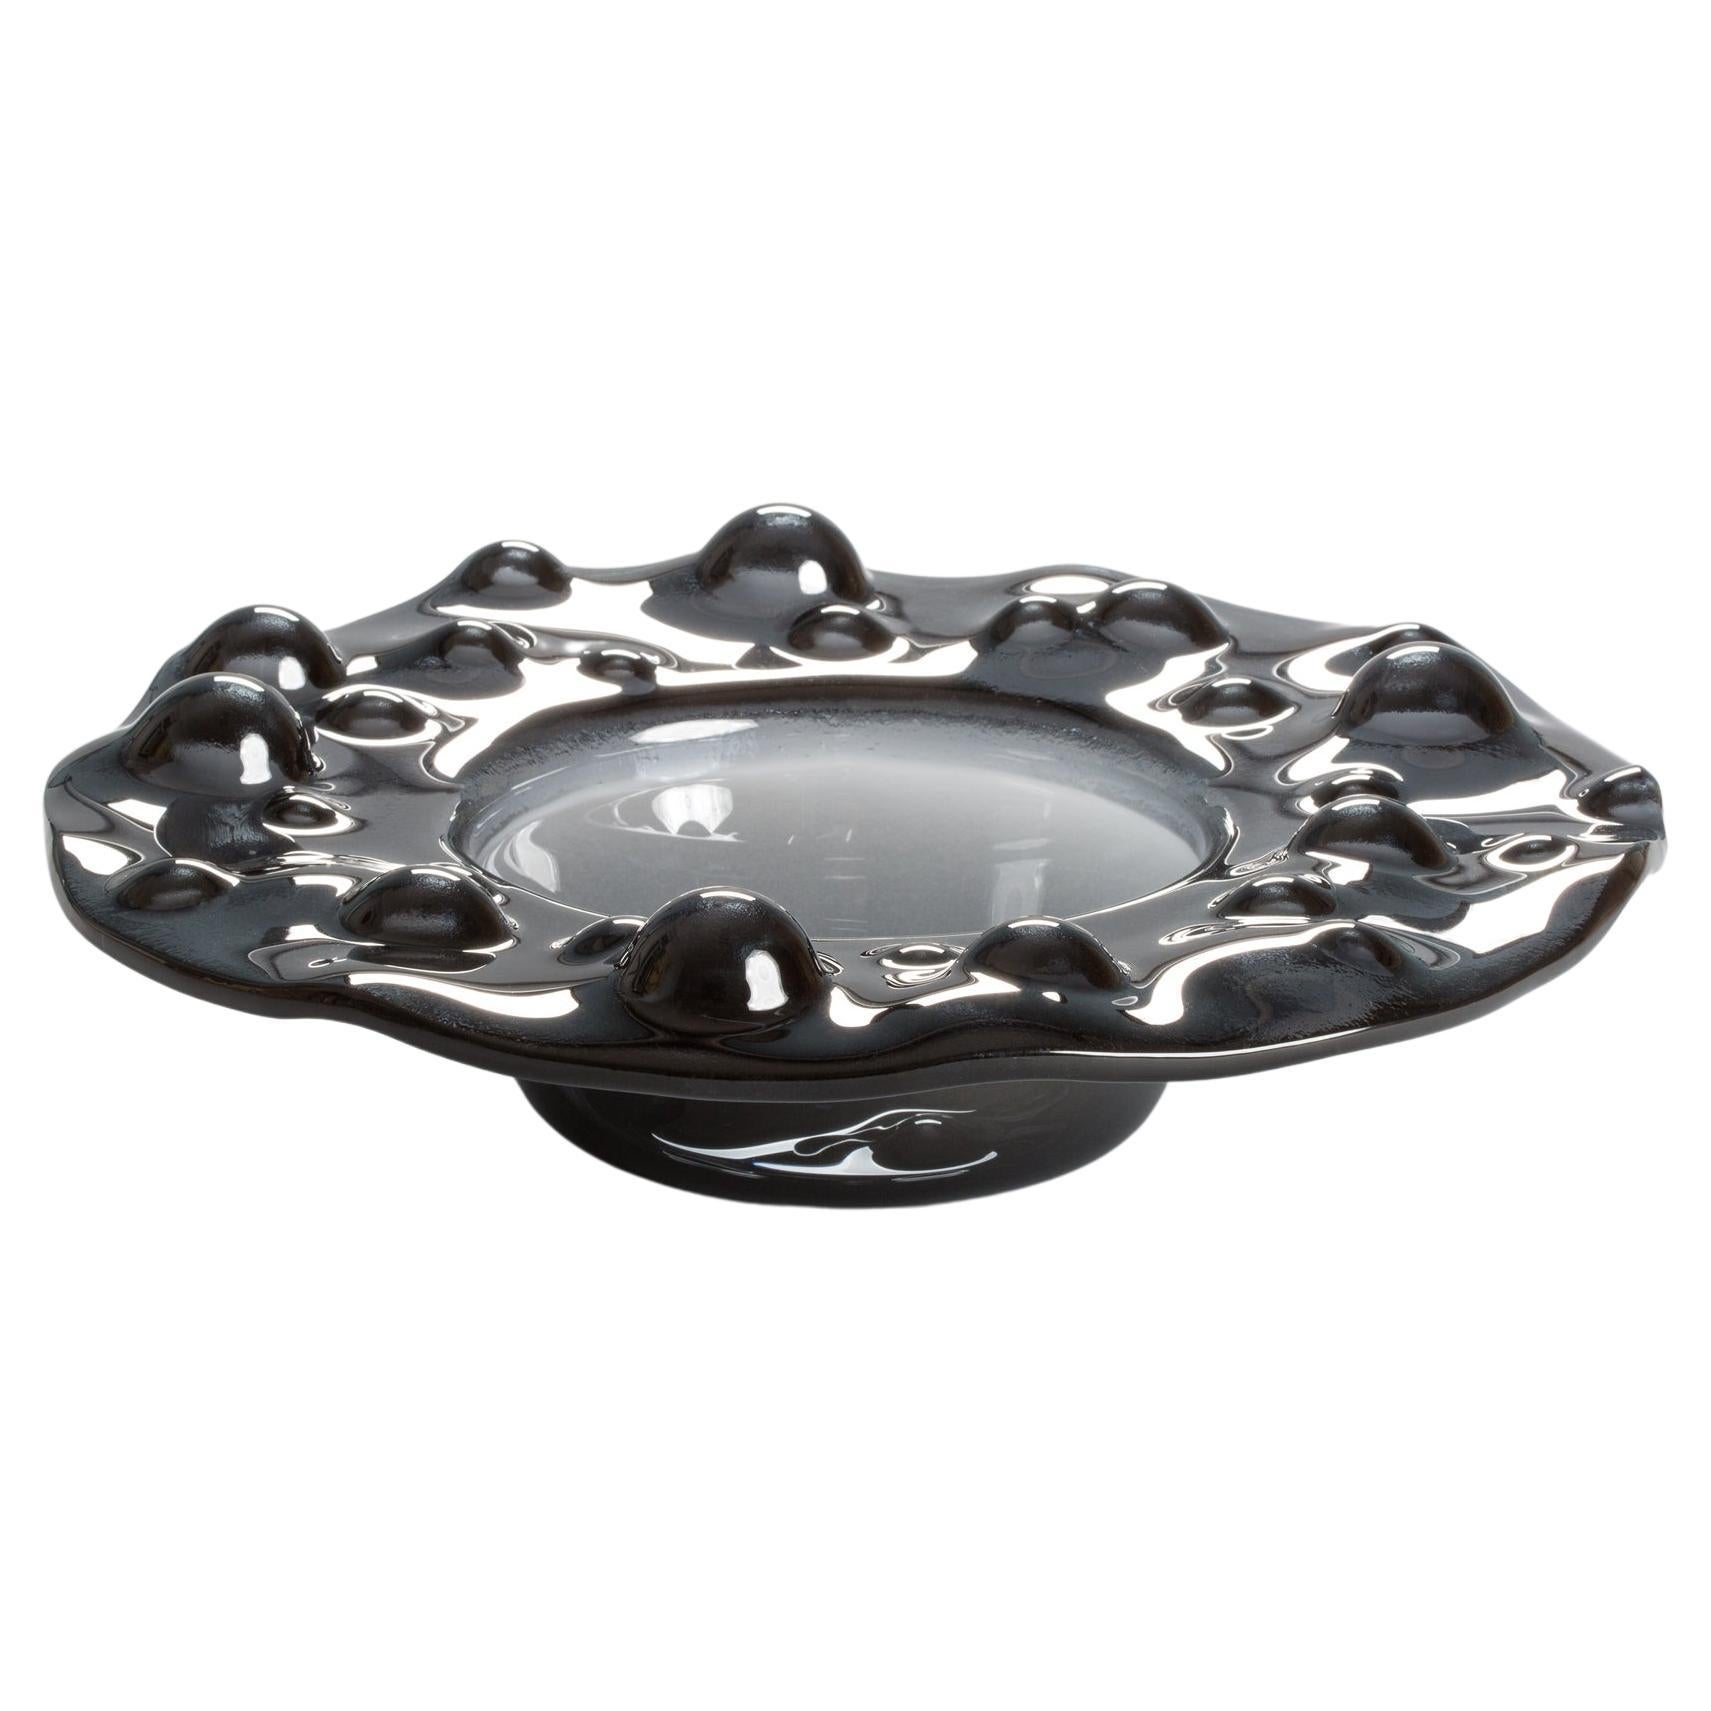 Plus Object glass bowl "Geyser" Graphite For Sale